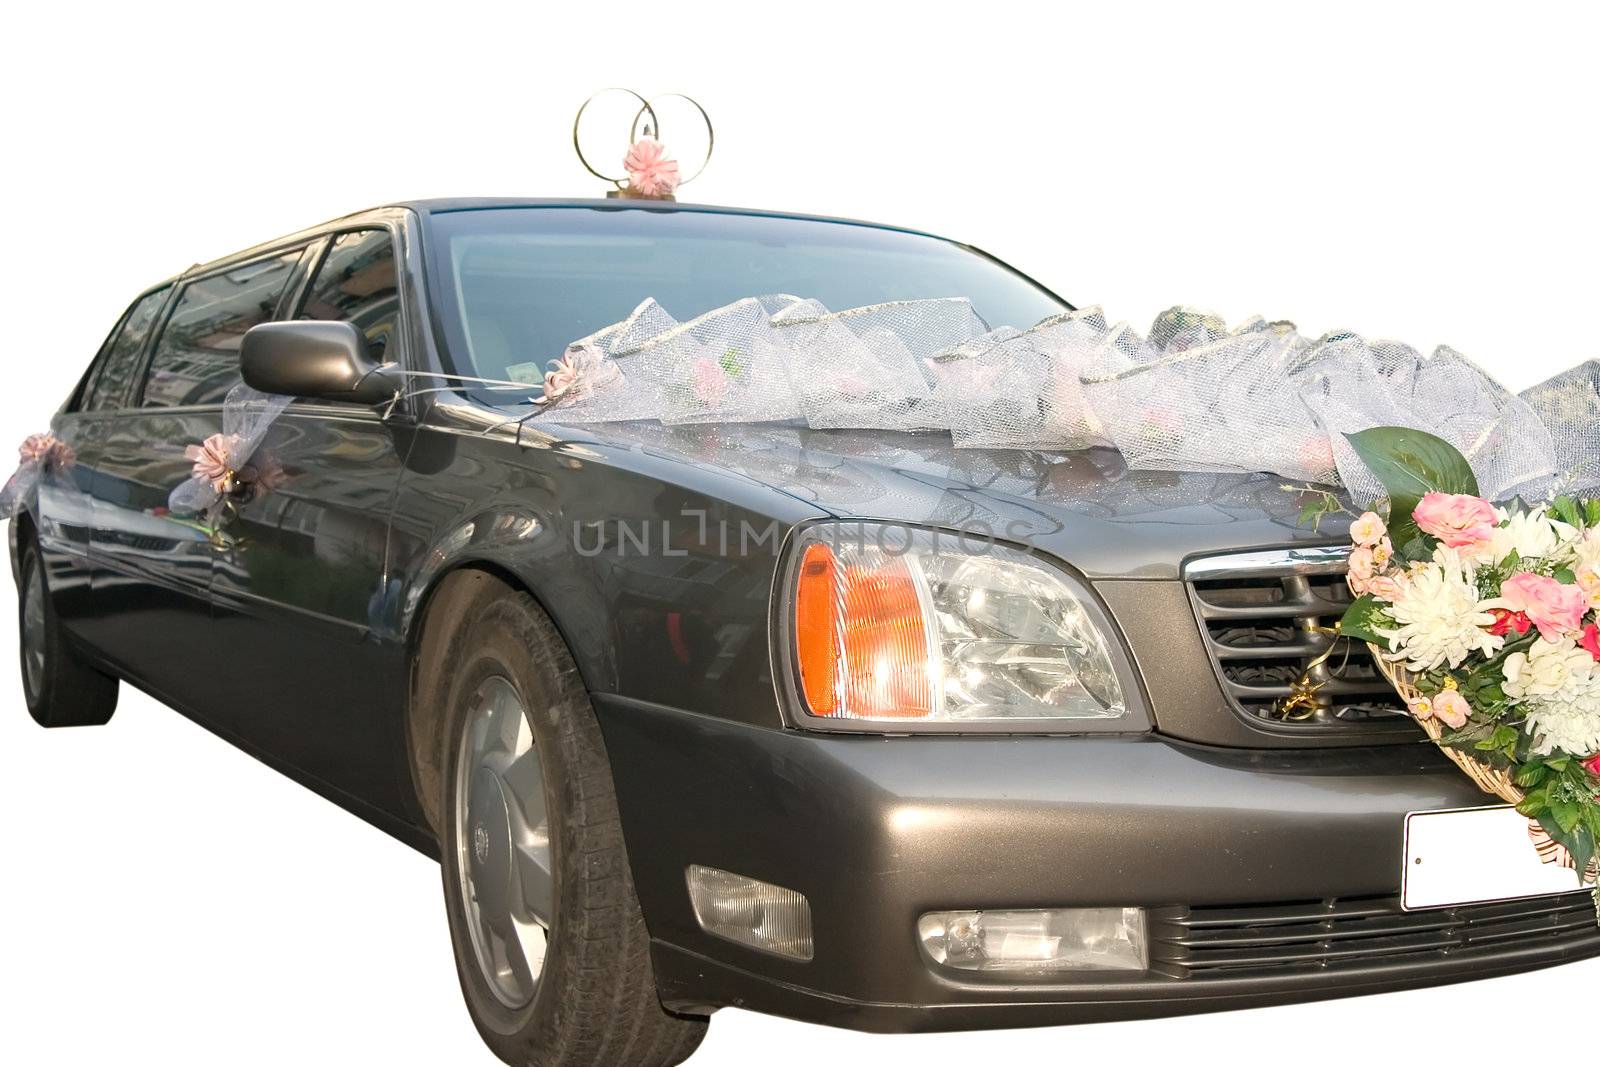 The decorated wedding limousine on a white background